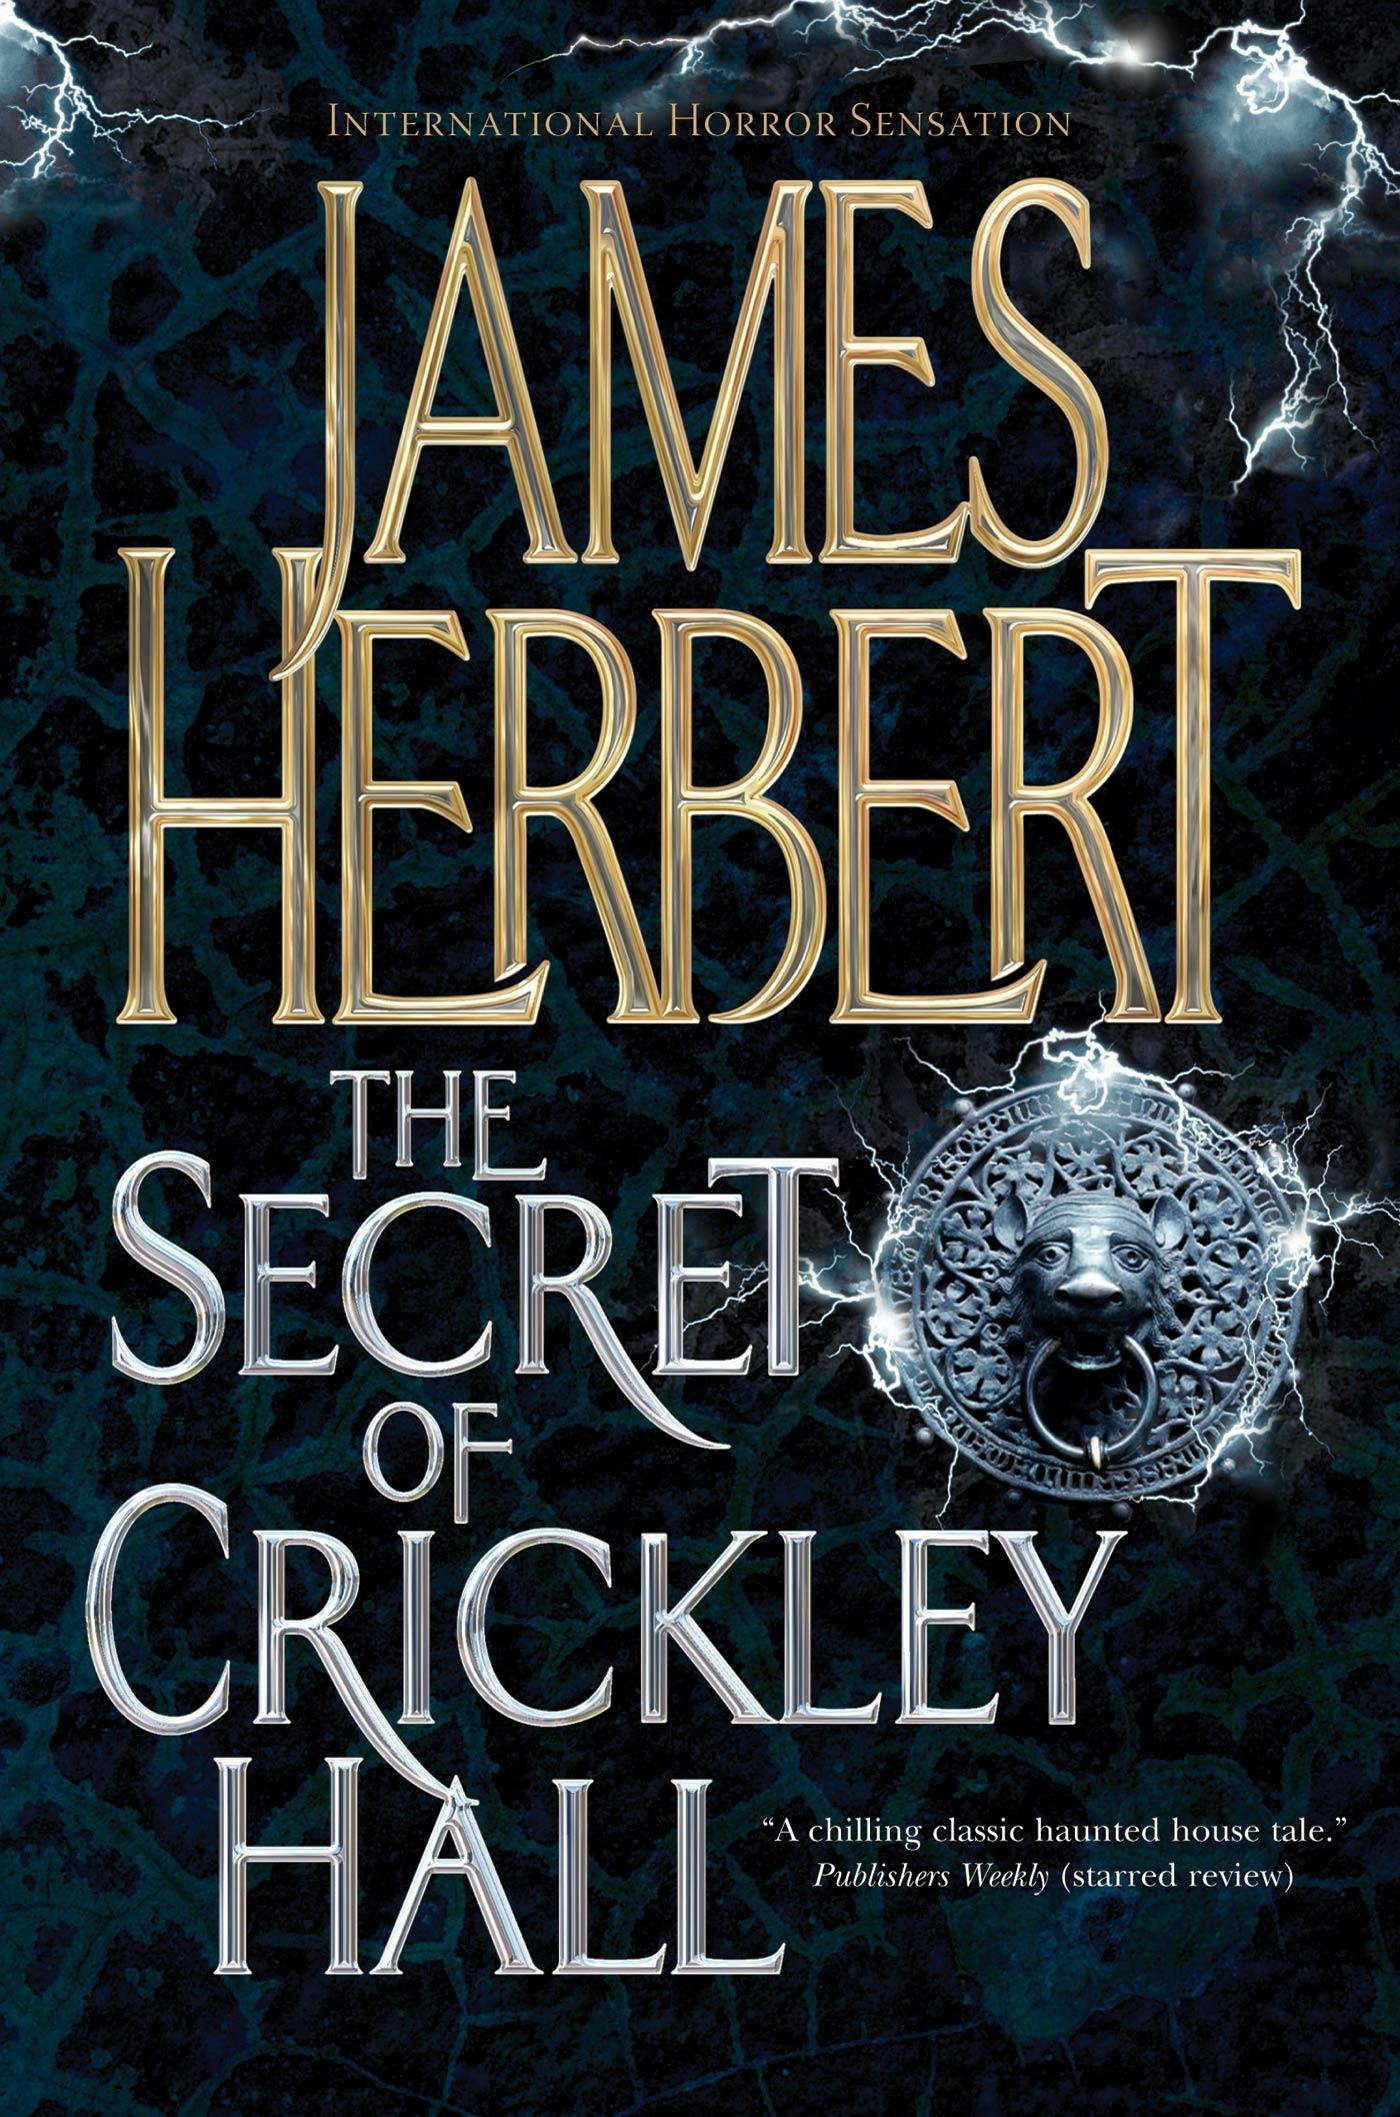 Cover for the book titled as: The Secret of Crickley Hall